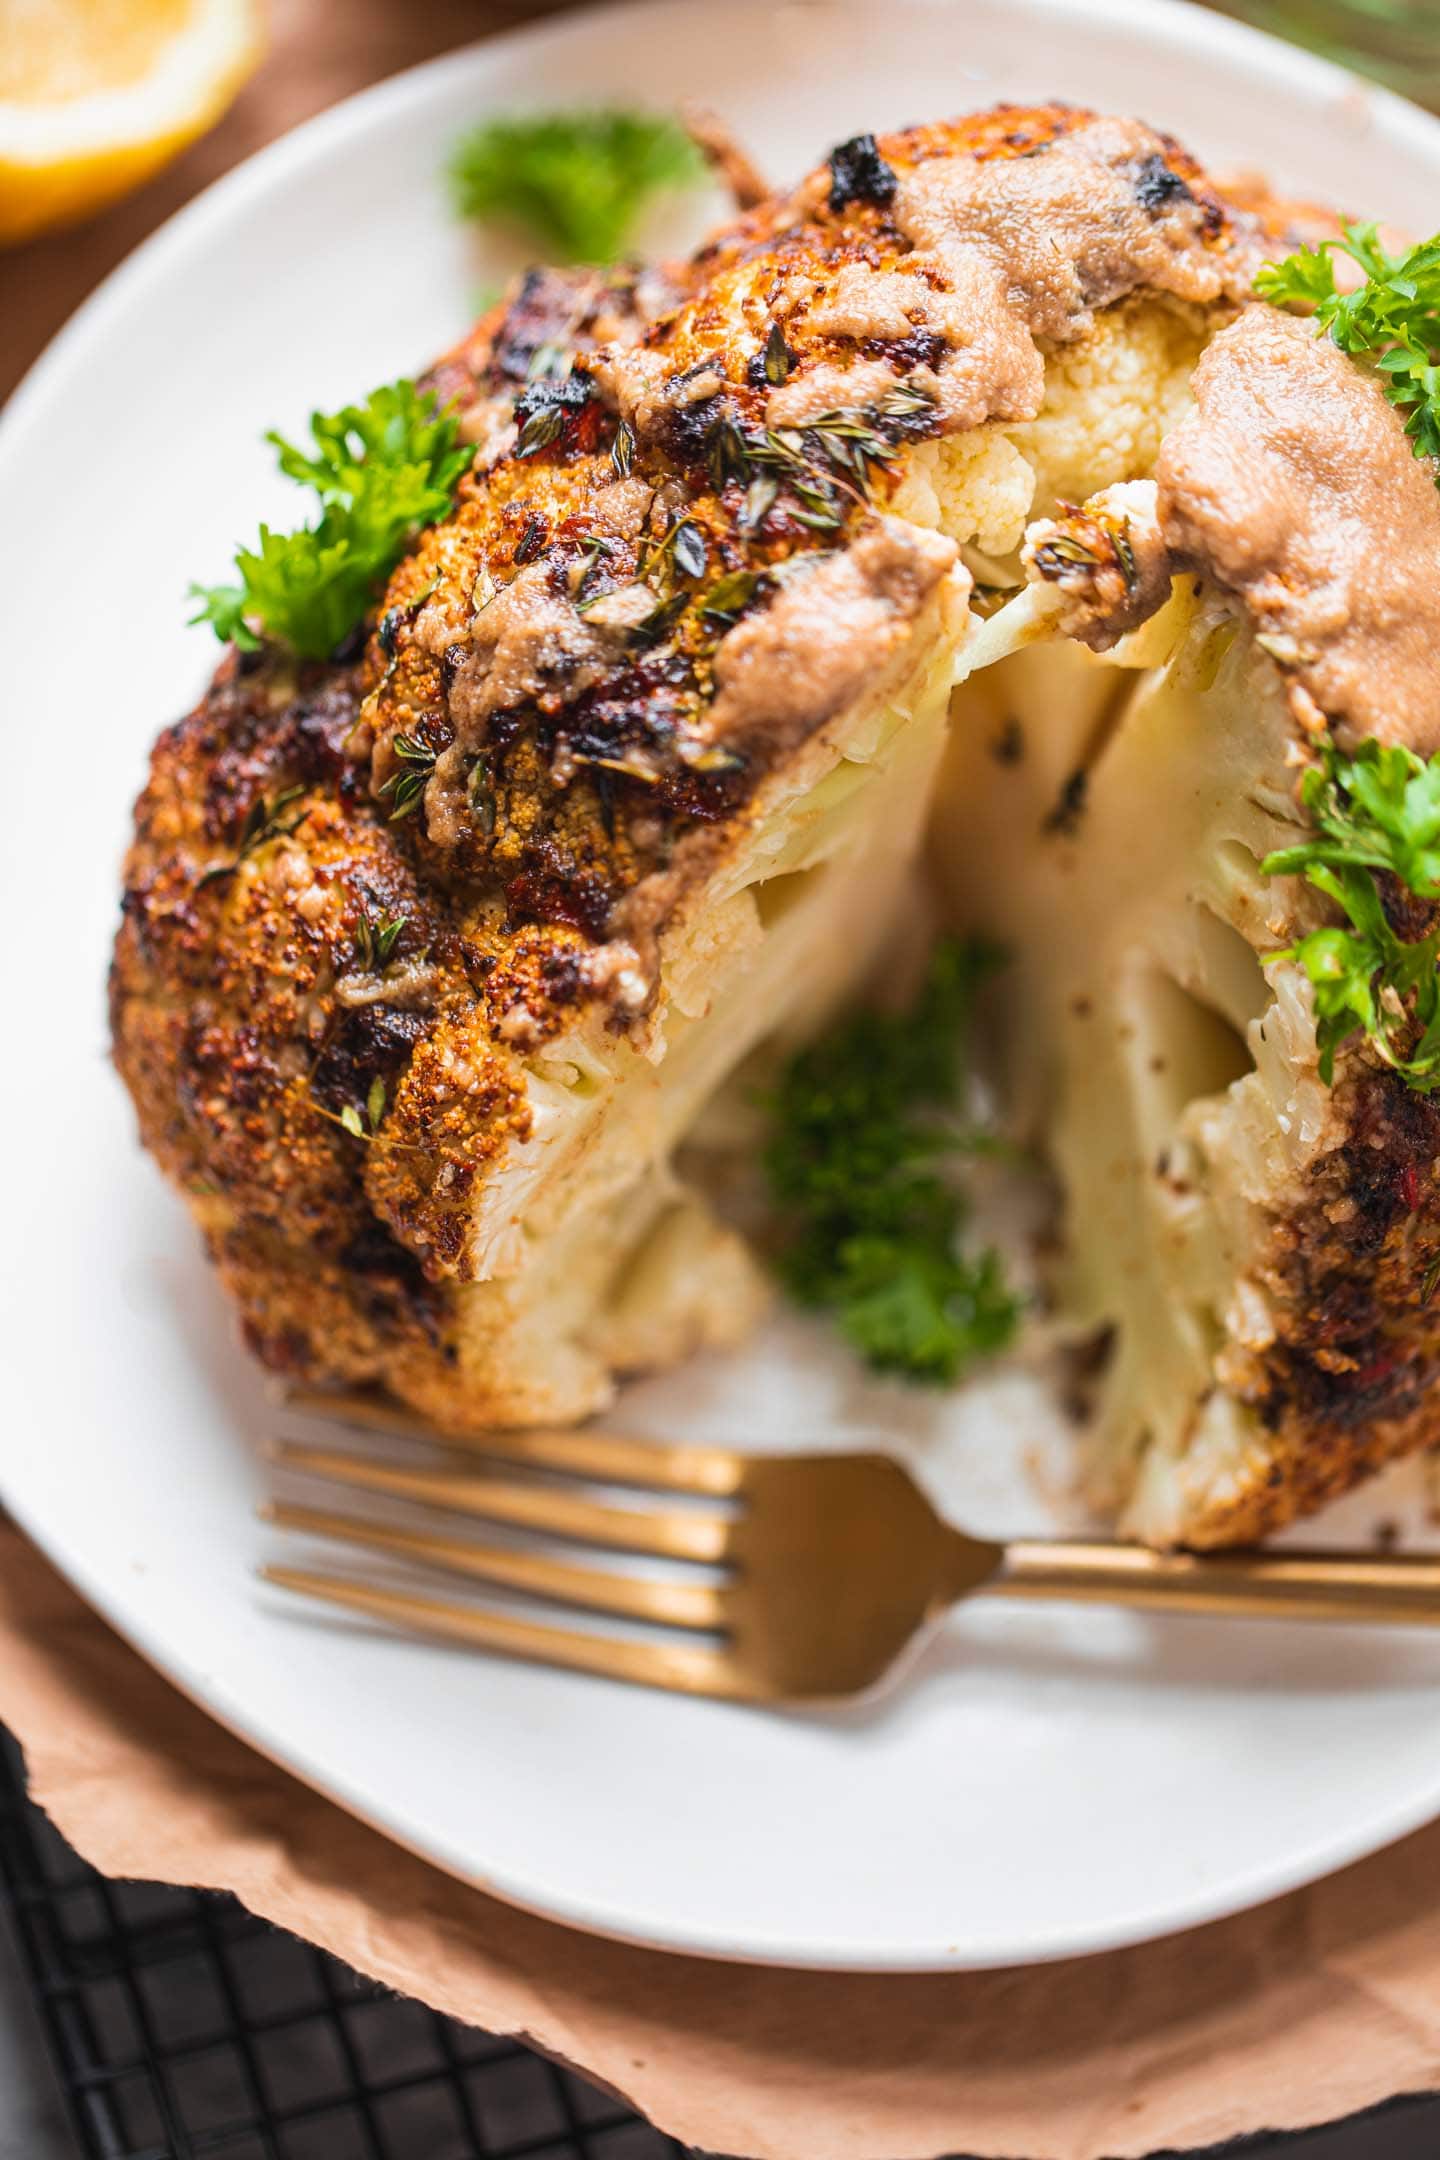 Roasted cauliflower on a plate with herbs